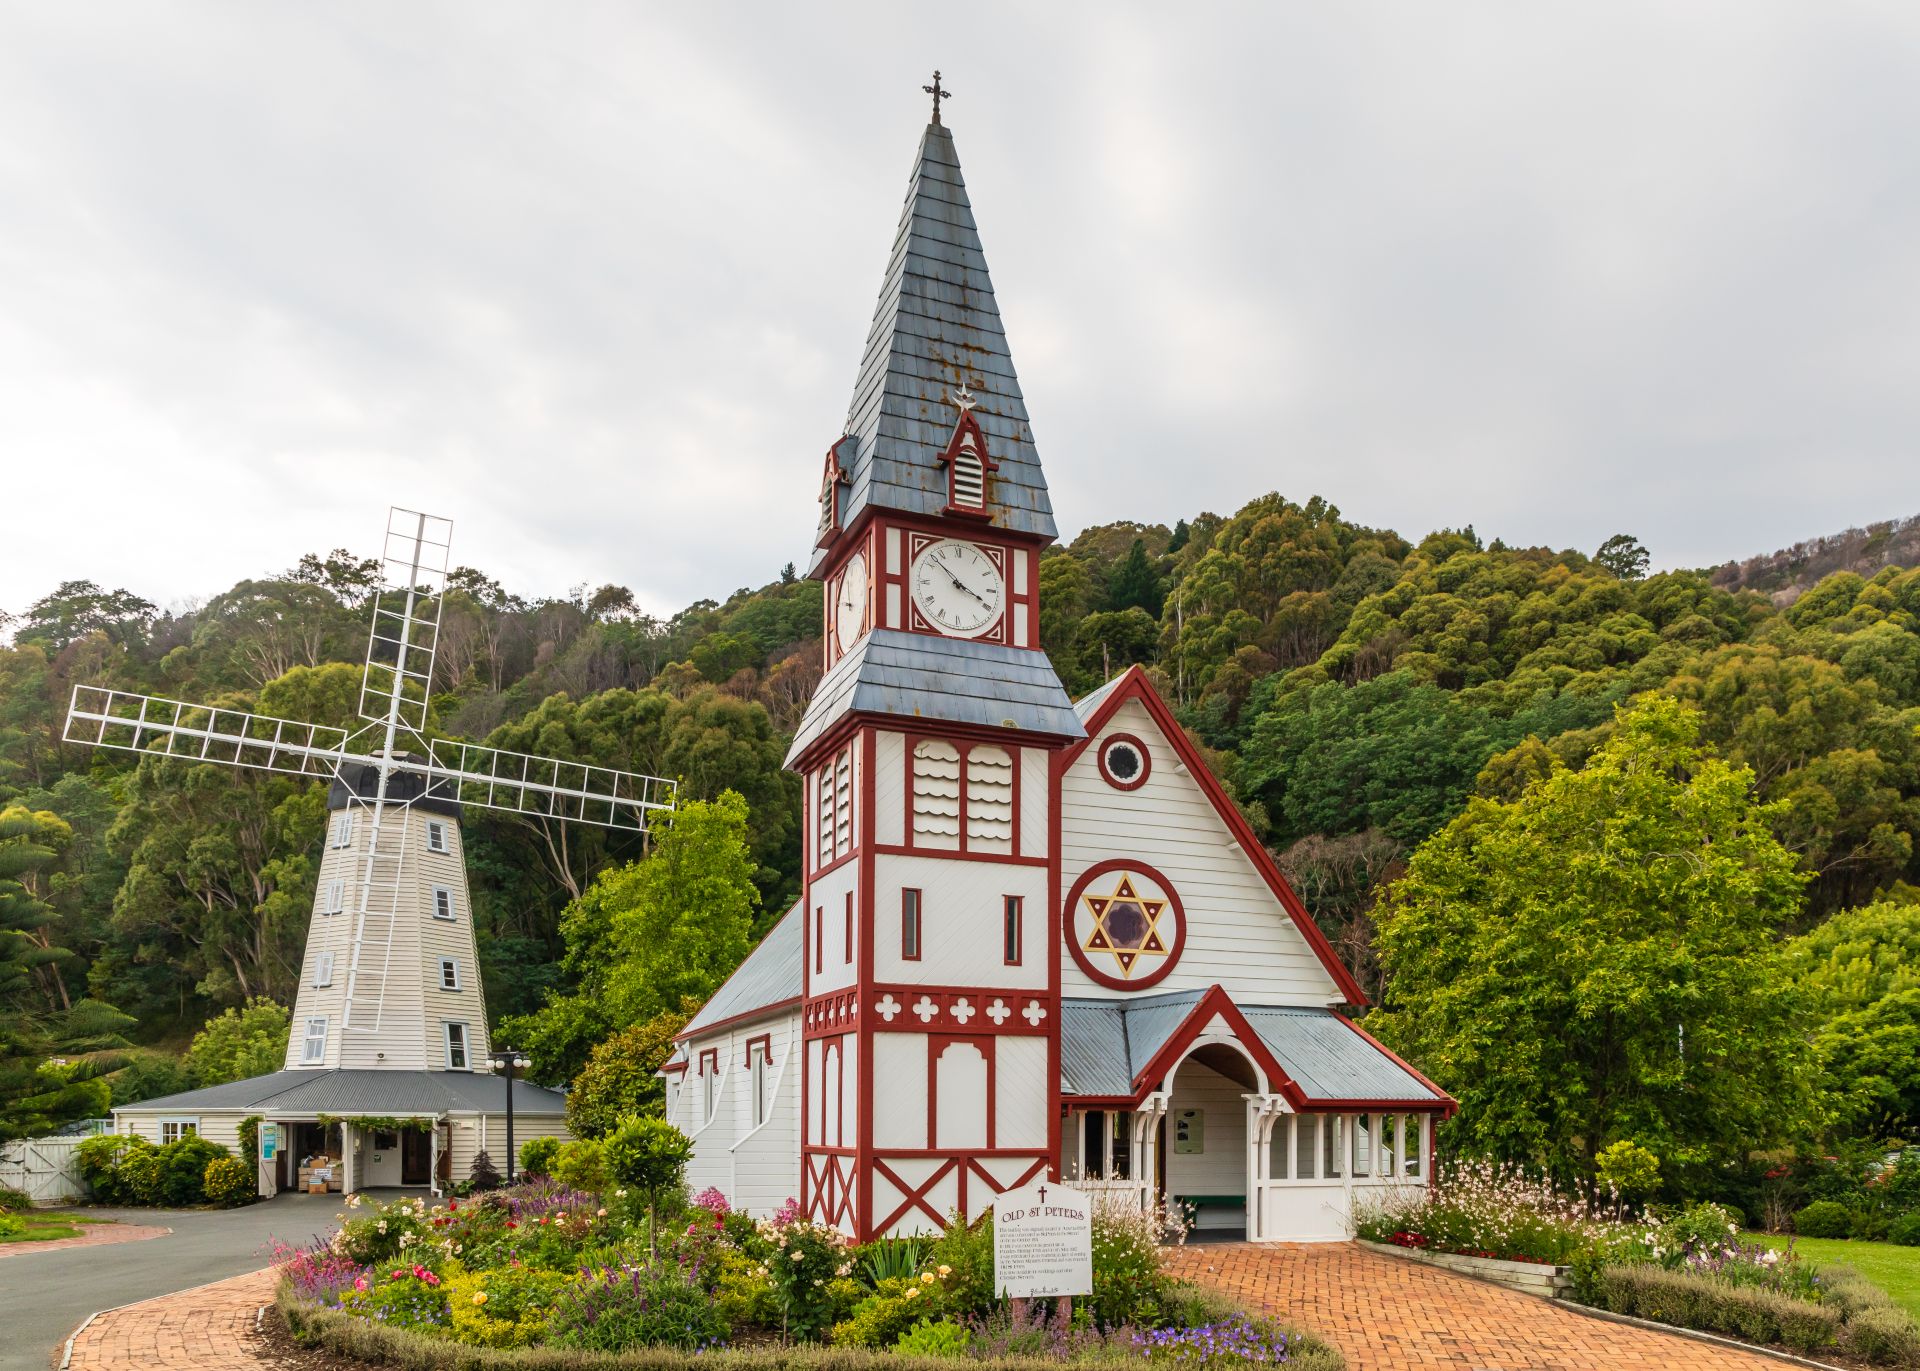 Wooden Church in Founders Park, New Zealand.